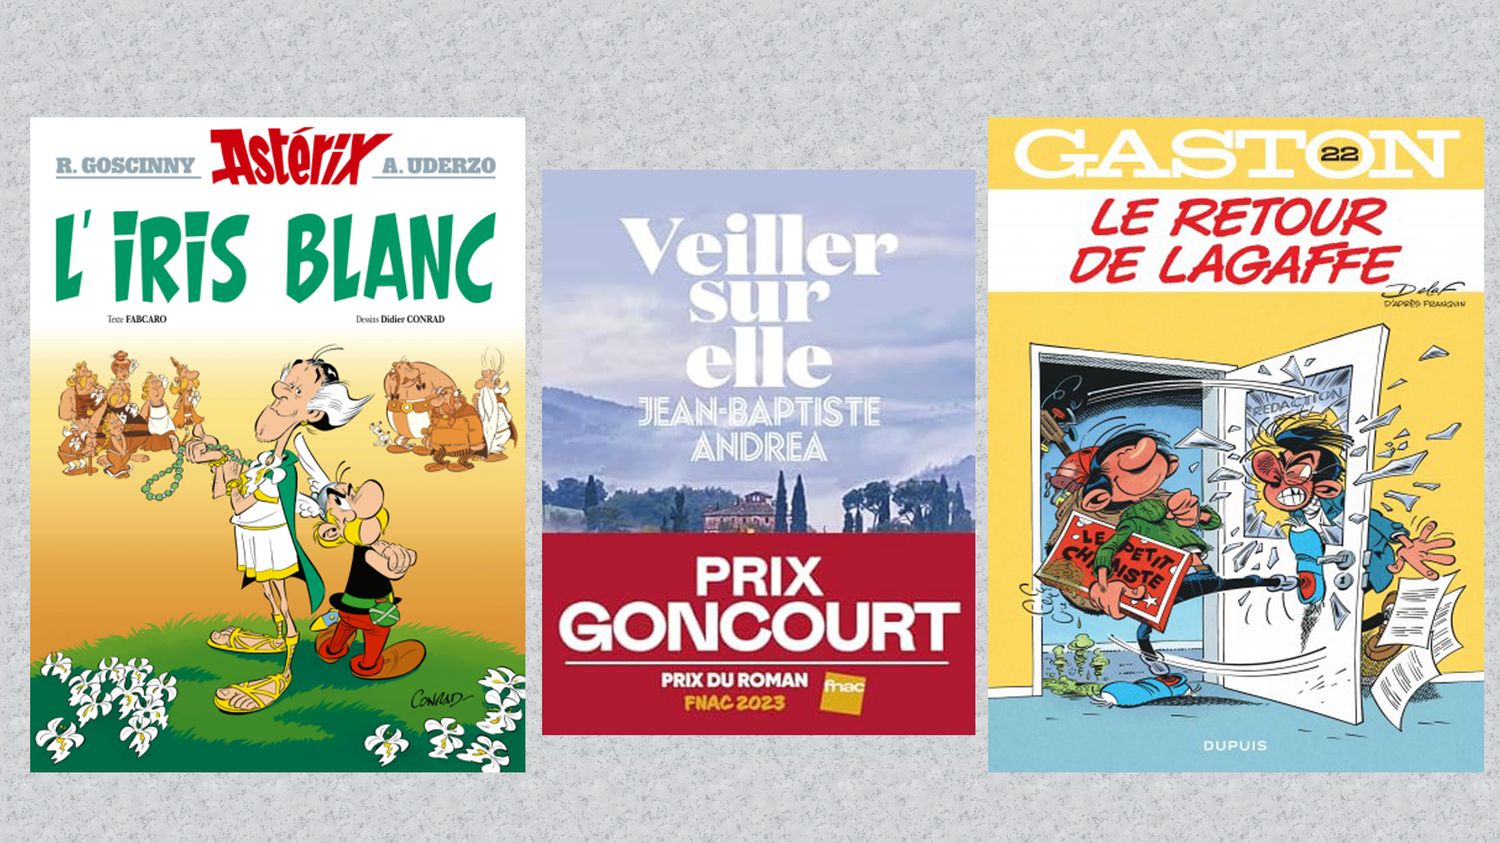 Asterix, Gaston Lagaffe and the Prize of Goncourt: the trio of best-selling books in 2023.